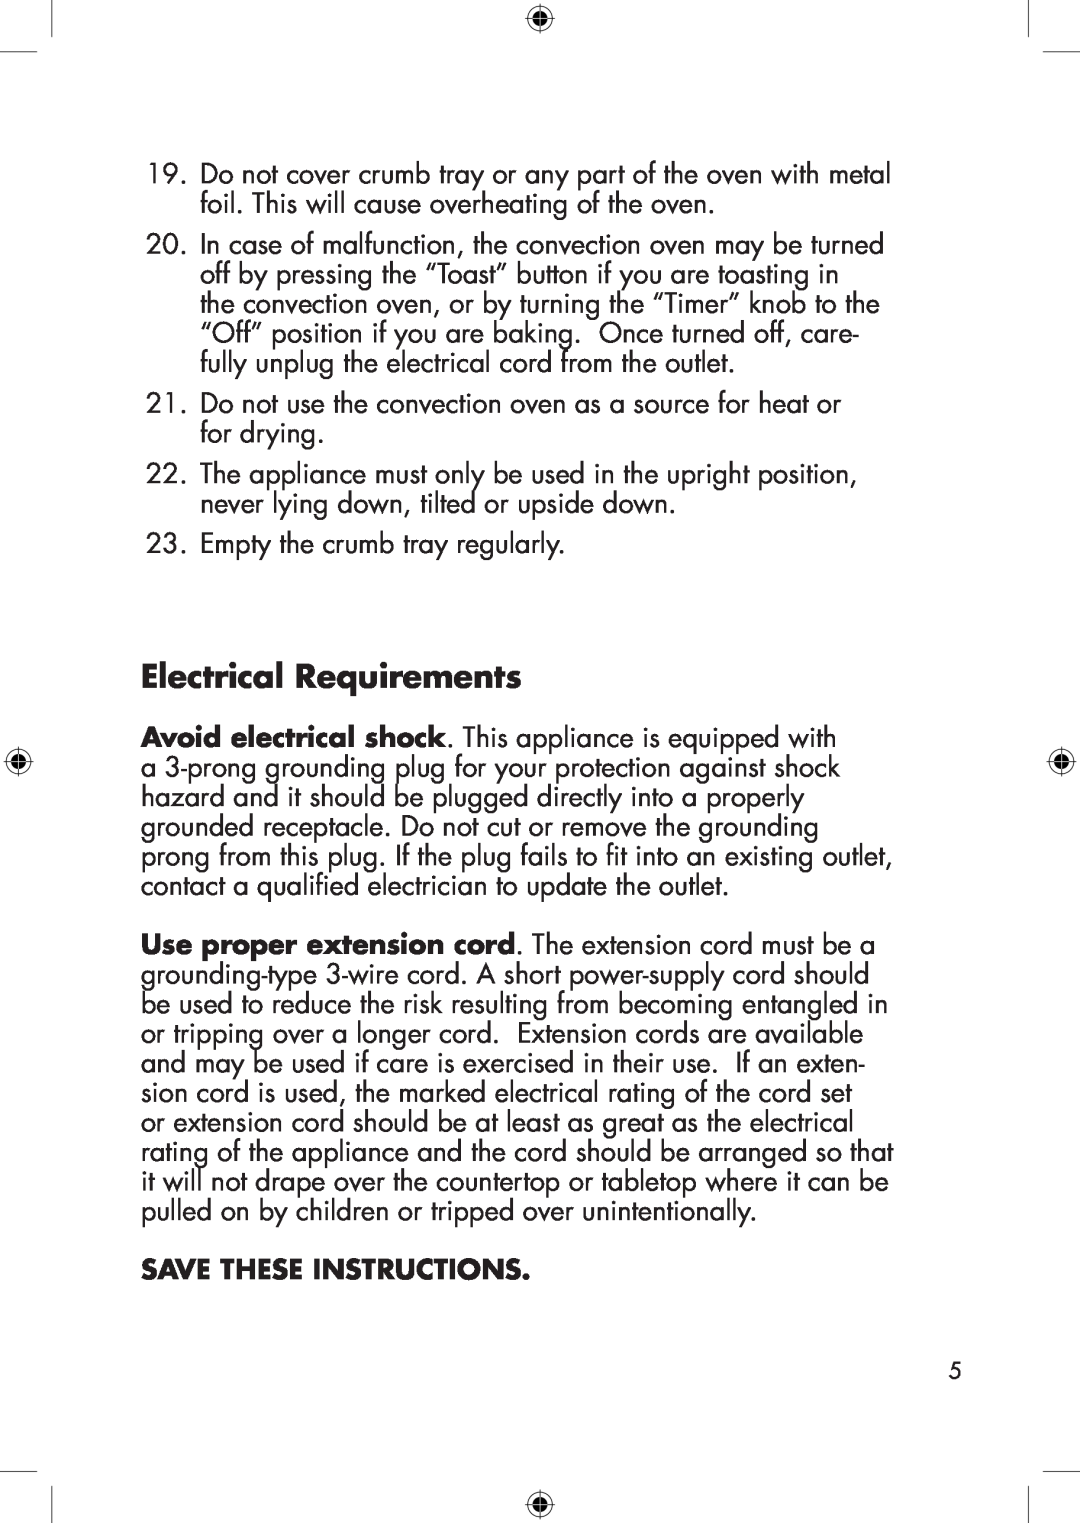 Calphalon he650co manual Electrical Requirements, Save These Instructions 